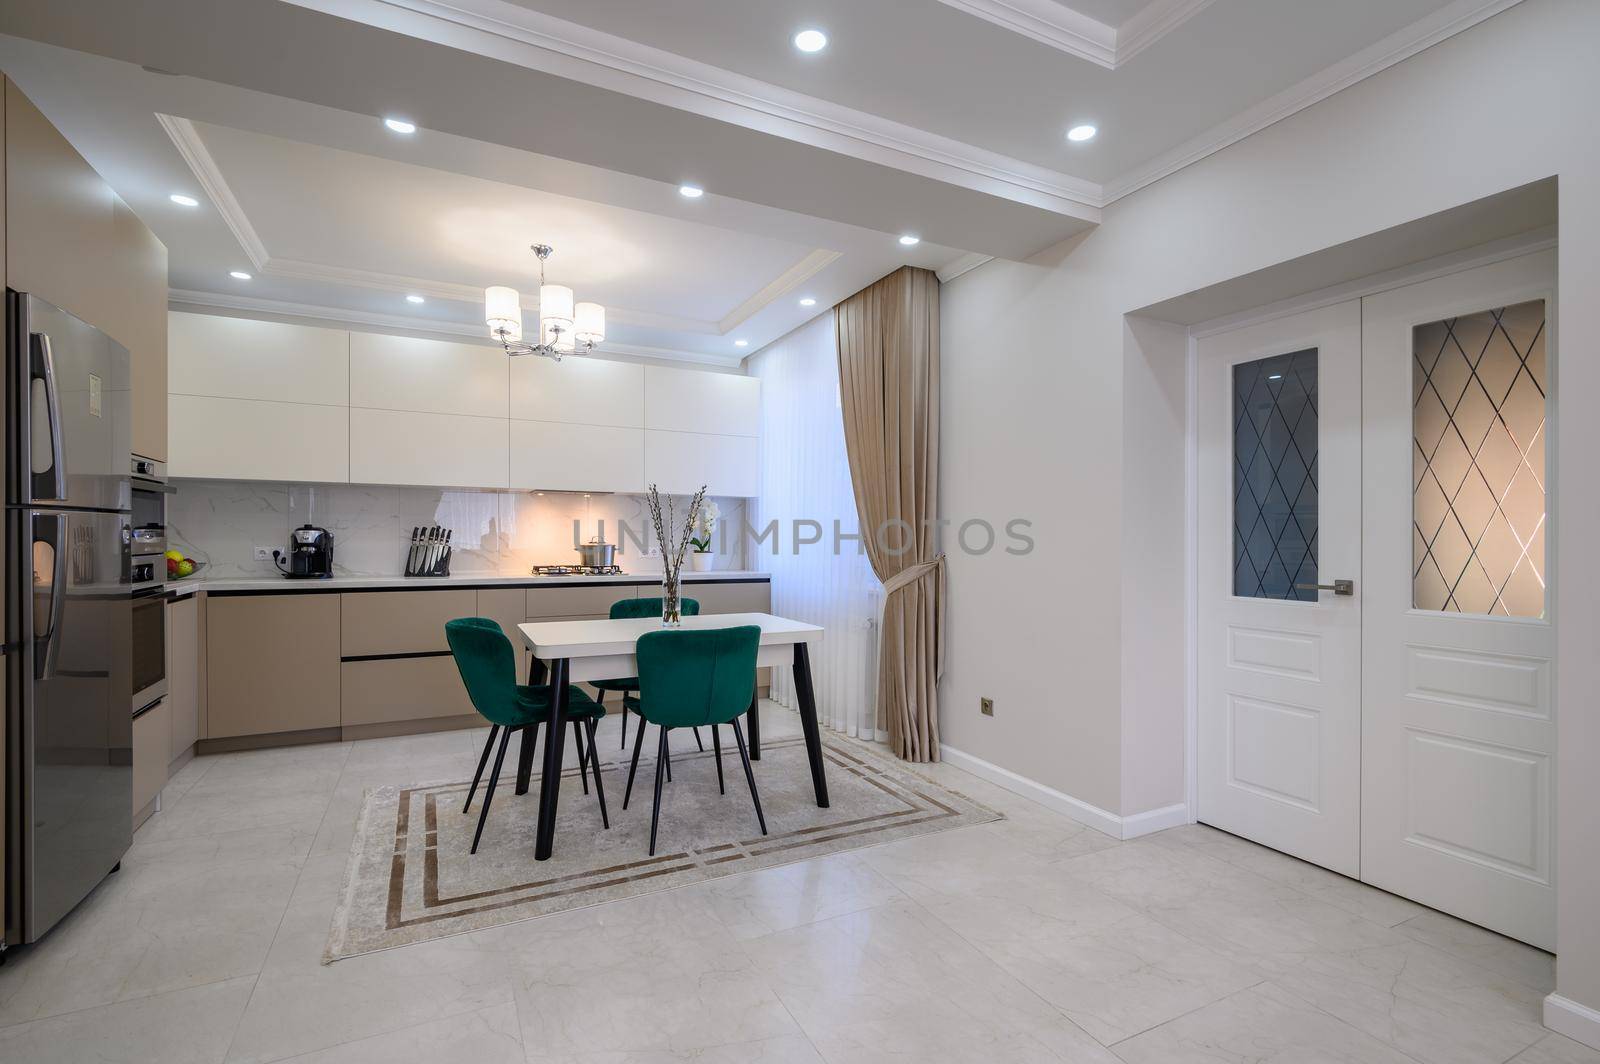 Modern classic white and beige luxurious kitchen with dining room in studio apartment interior